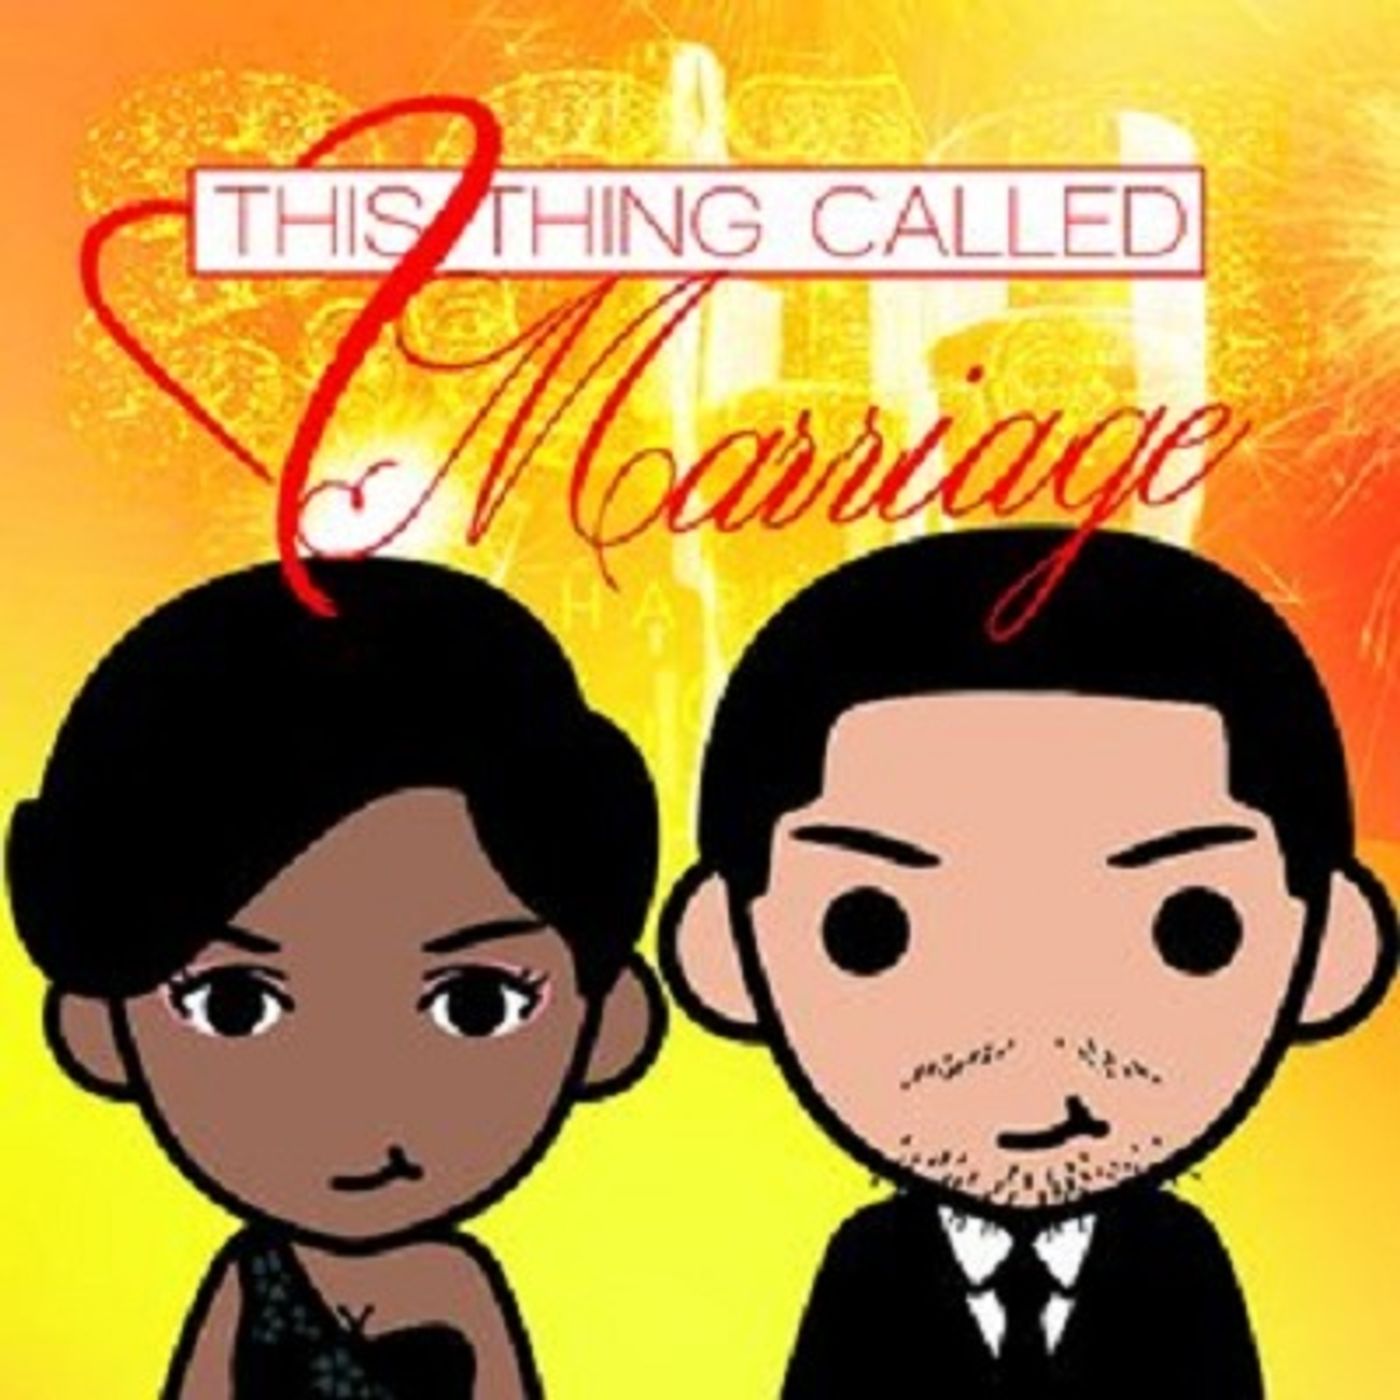 Throwback - Guests: This Thing Called Marriage